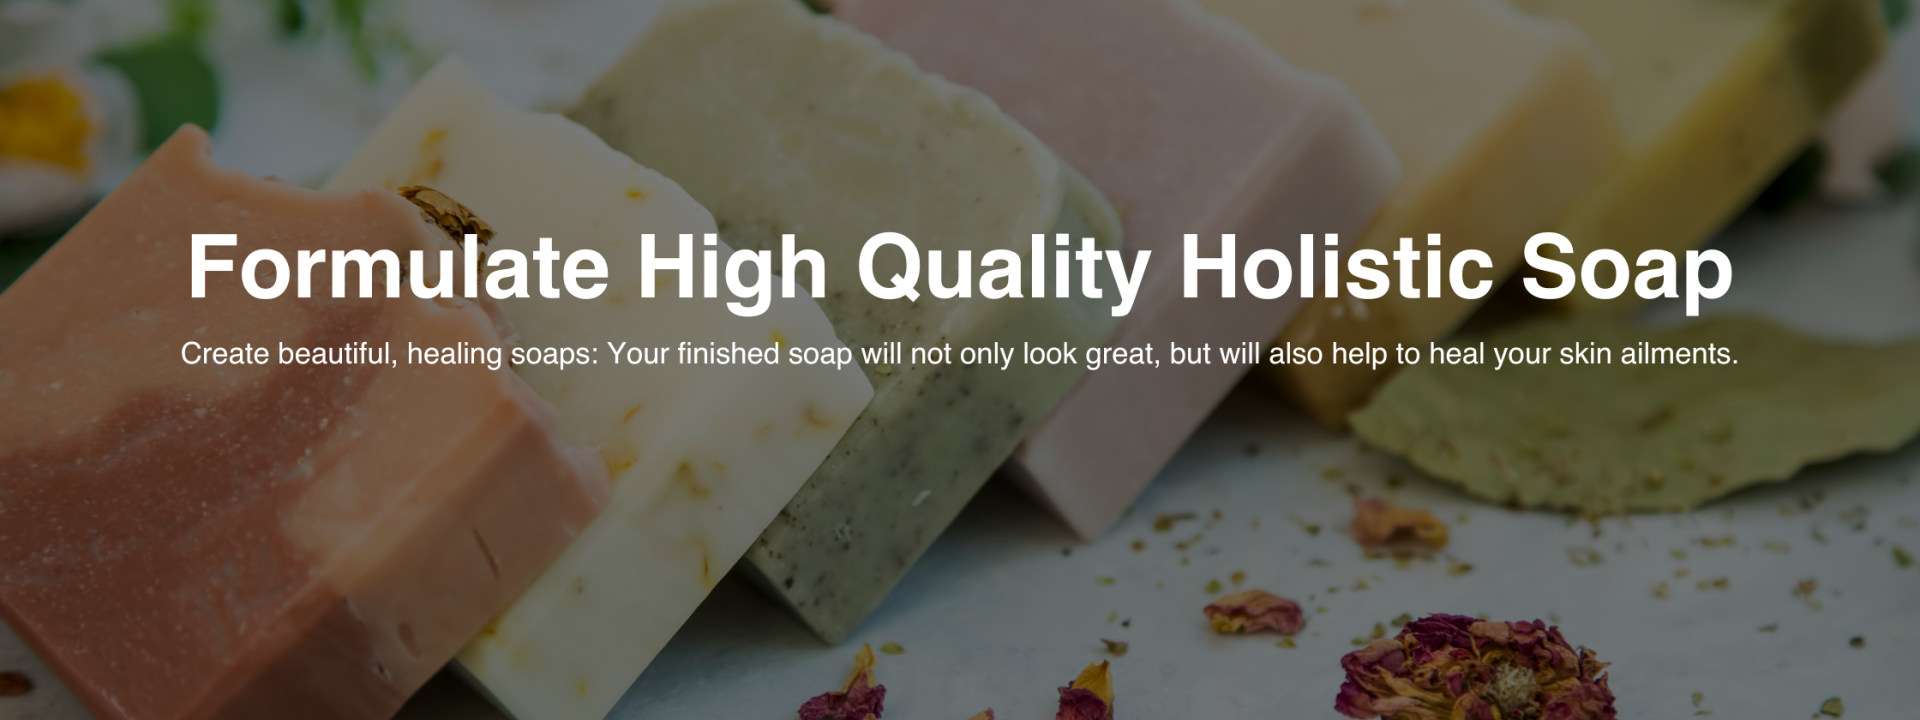 Formulate High Quality Holistic Soap Create beautiful, healing soaps Your finished soap will not only look great, but will also help to heal your skin ailments.